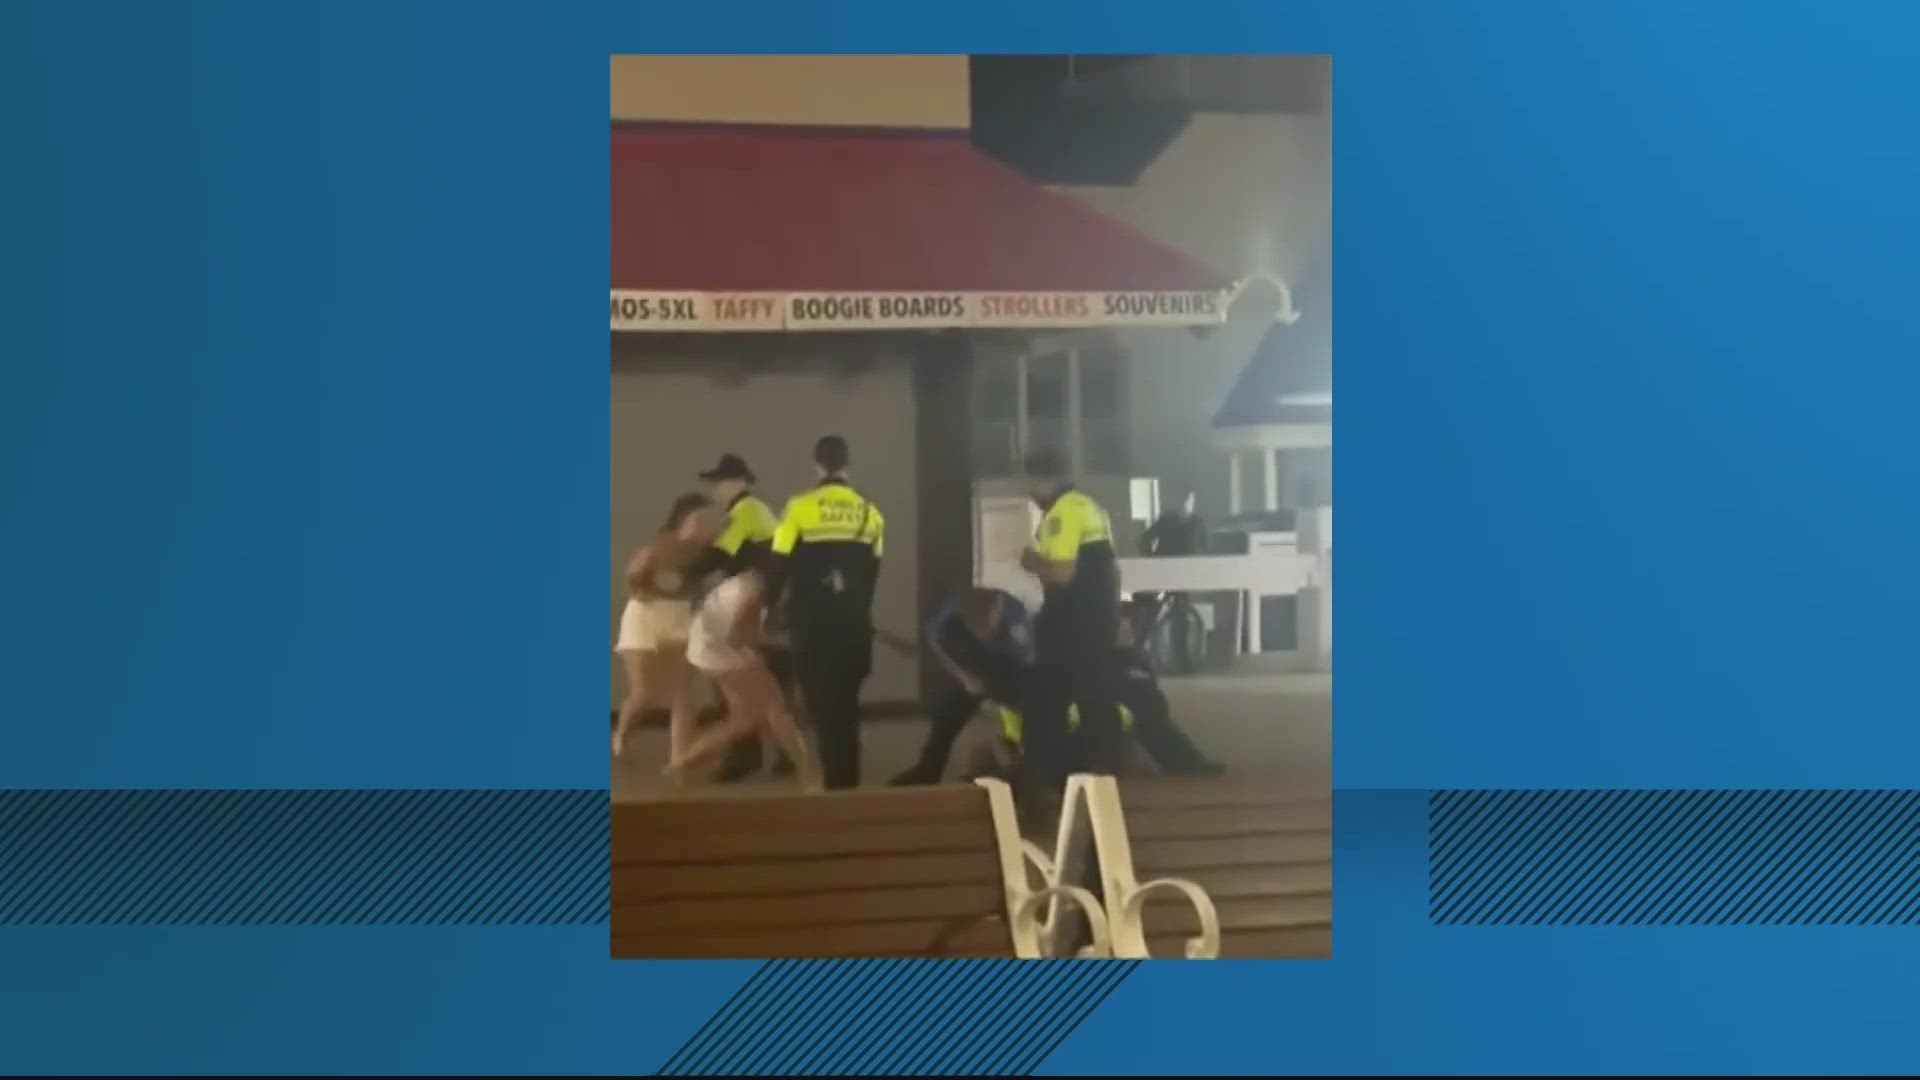 The family of a D.C. man claims he was brutalized by Ocean City, Maryland Police who were trying to enforce a ban against vaping on the boardwalk.